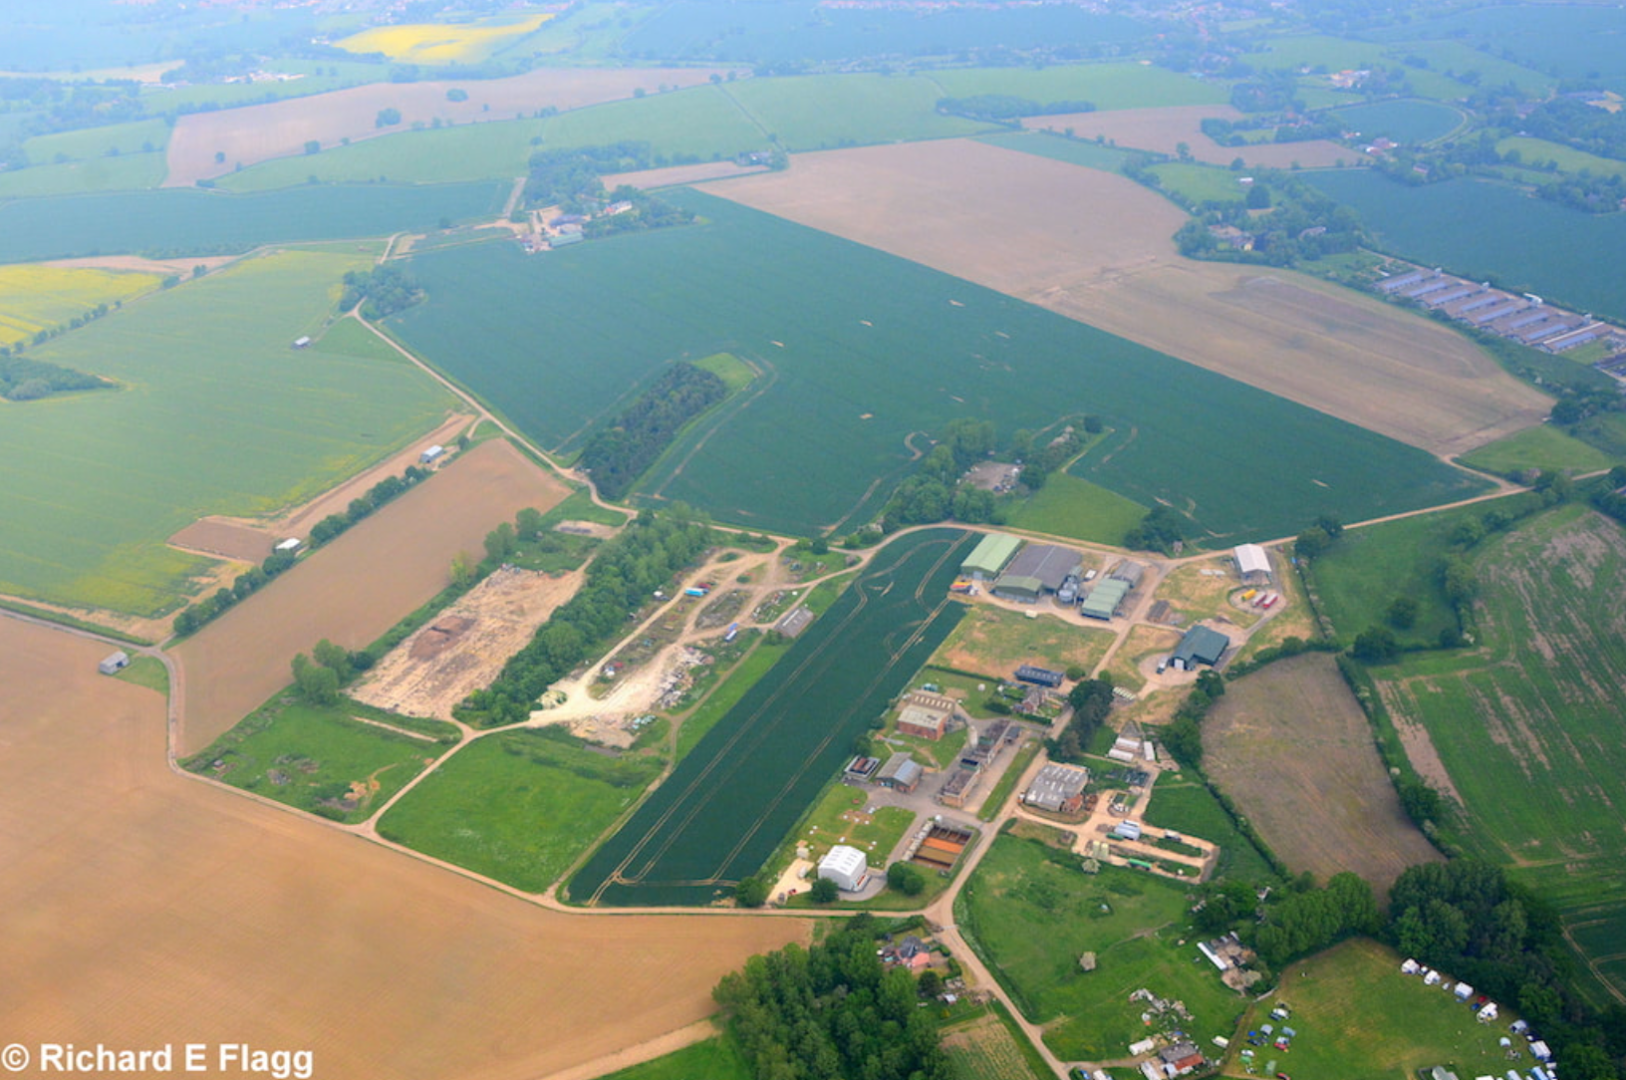 009Aerial View of Pulham St Mary Airship Station - 26 May 2018.png